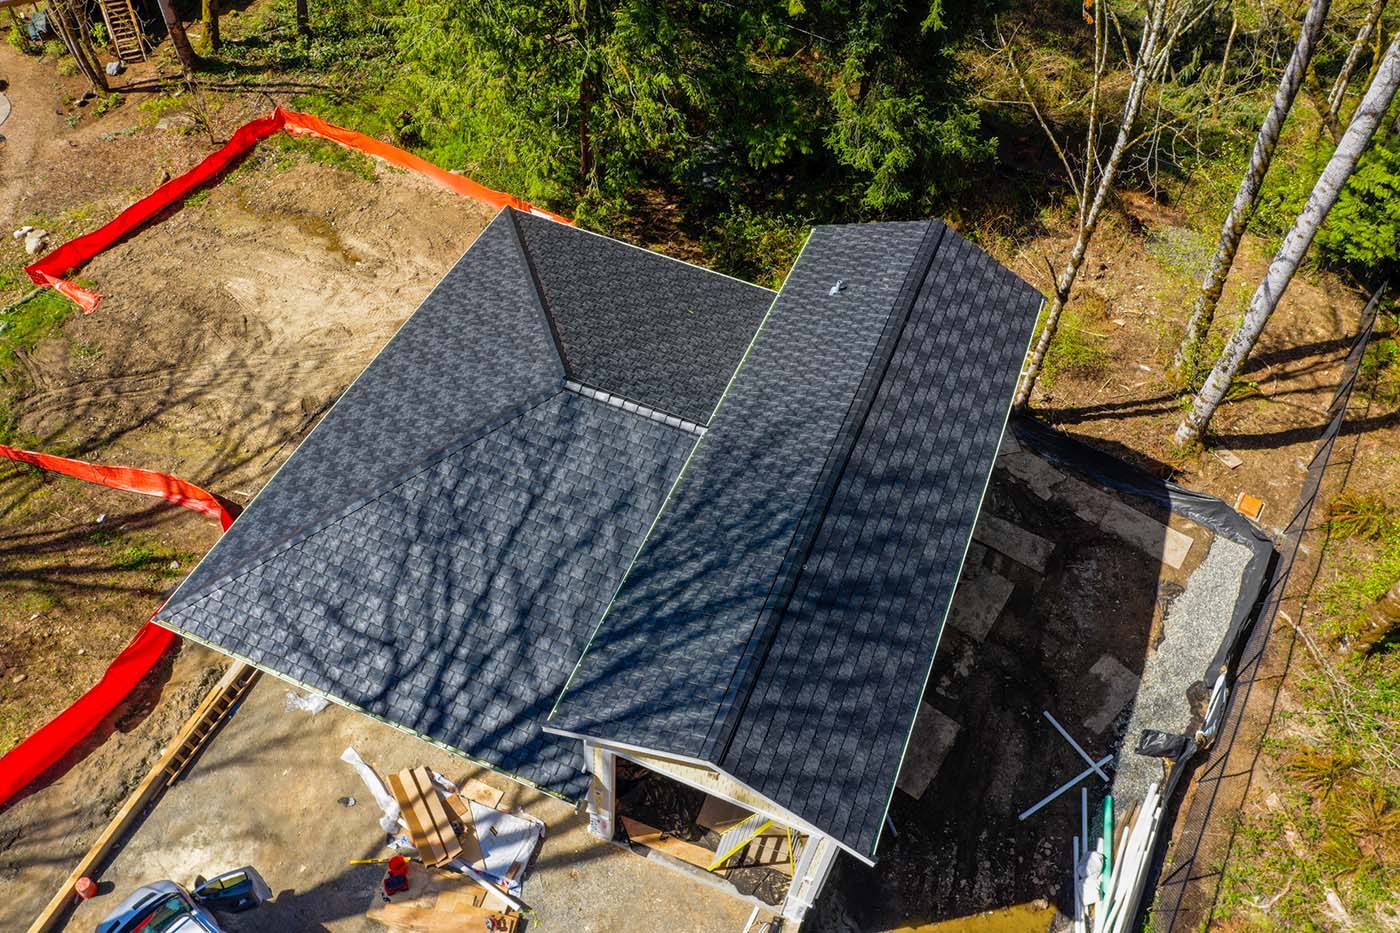 New Synthetic Garage Roof in Redmond, Washington - overhead view of roof from an angle